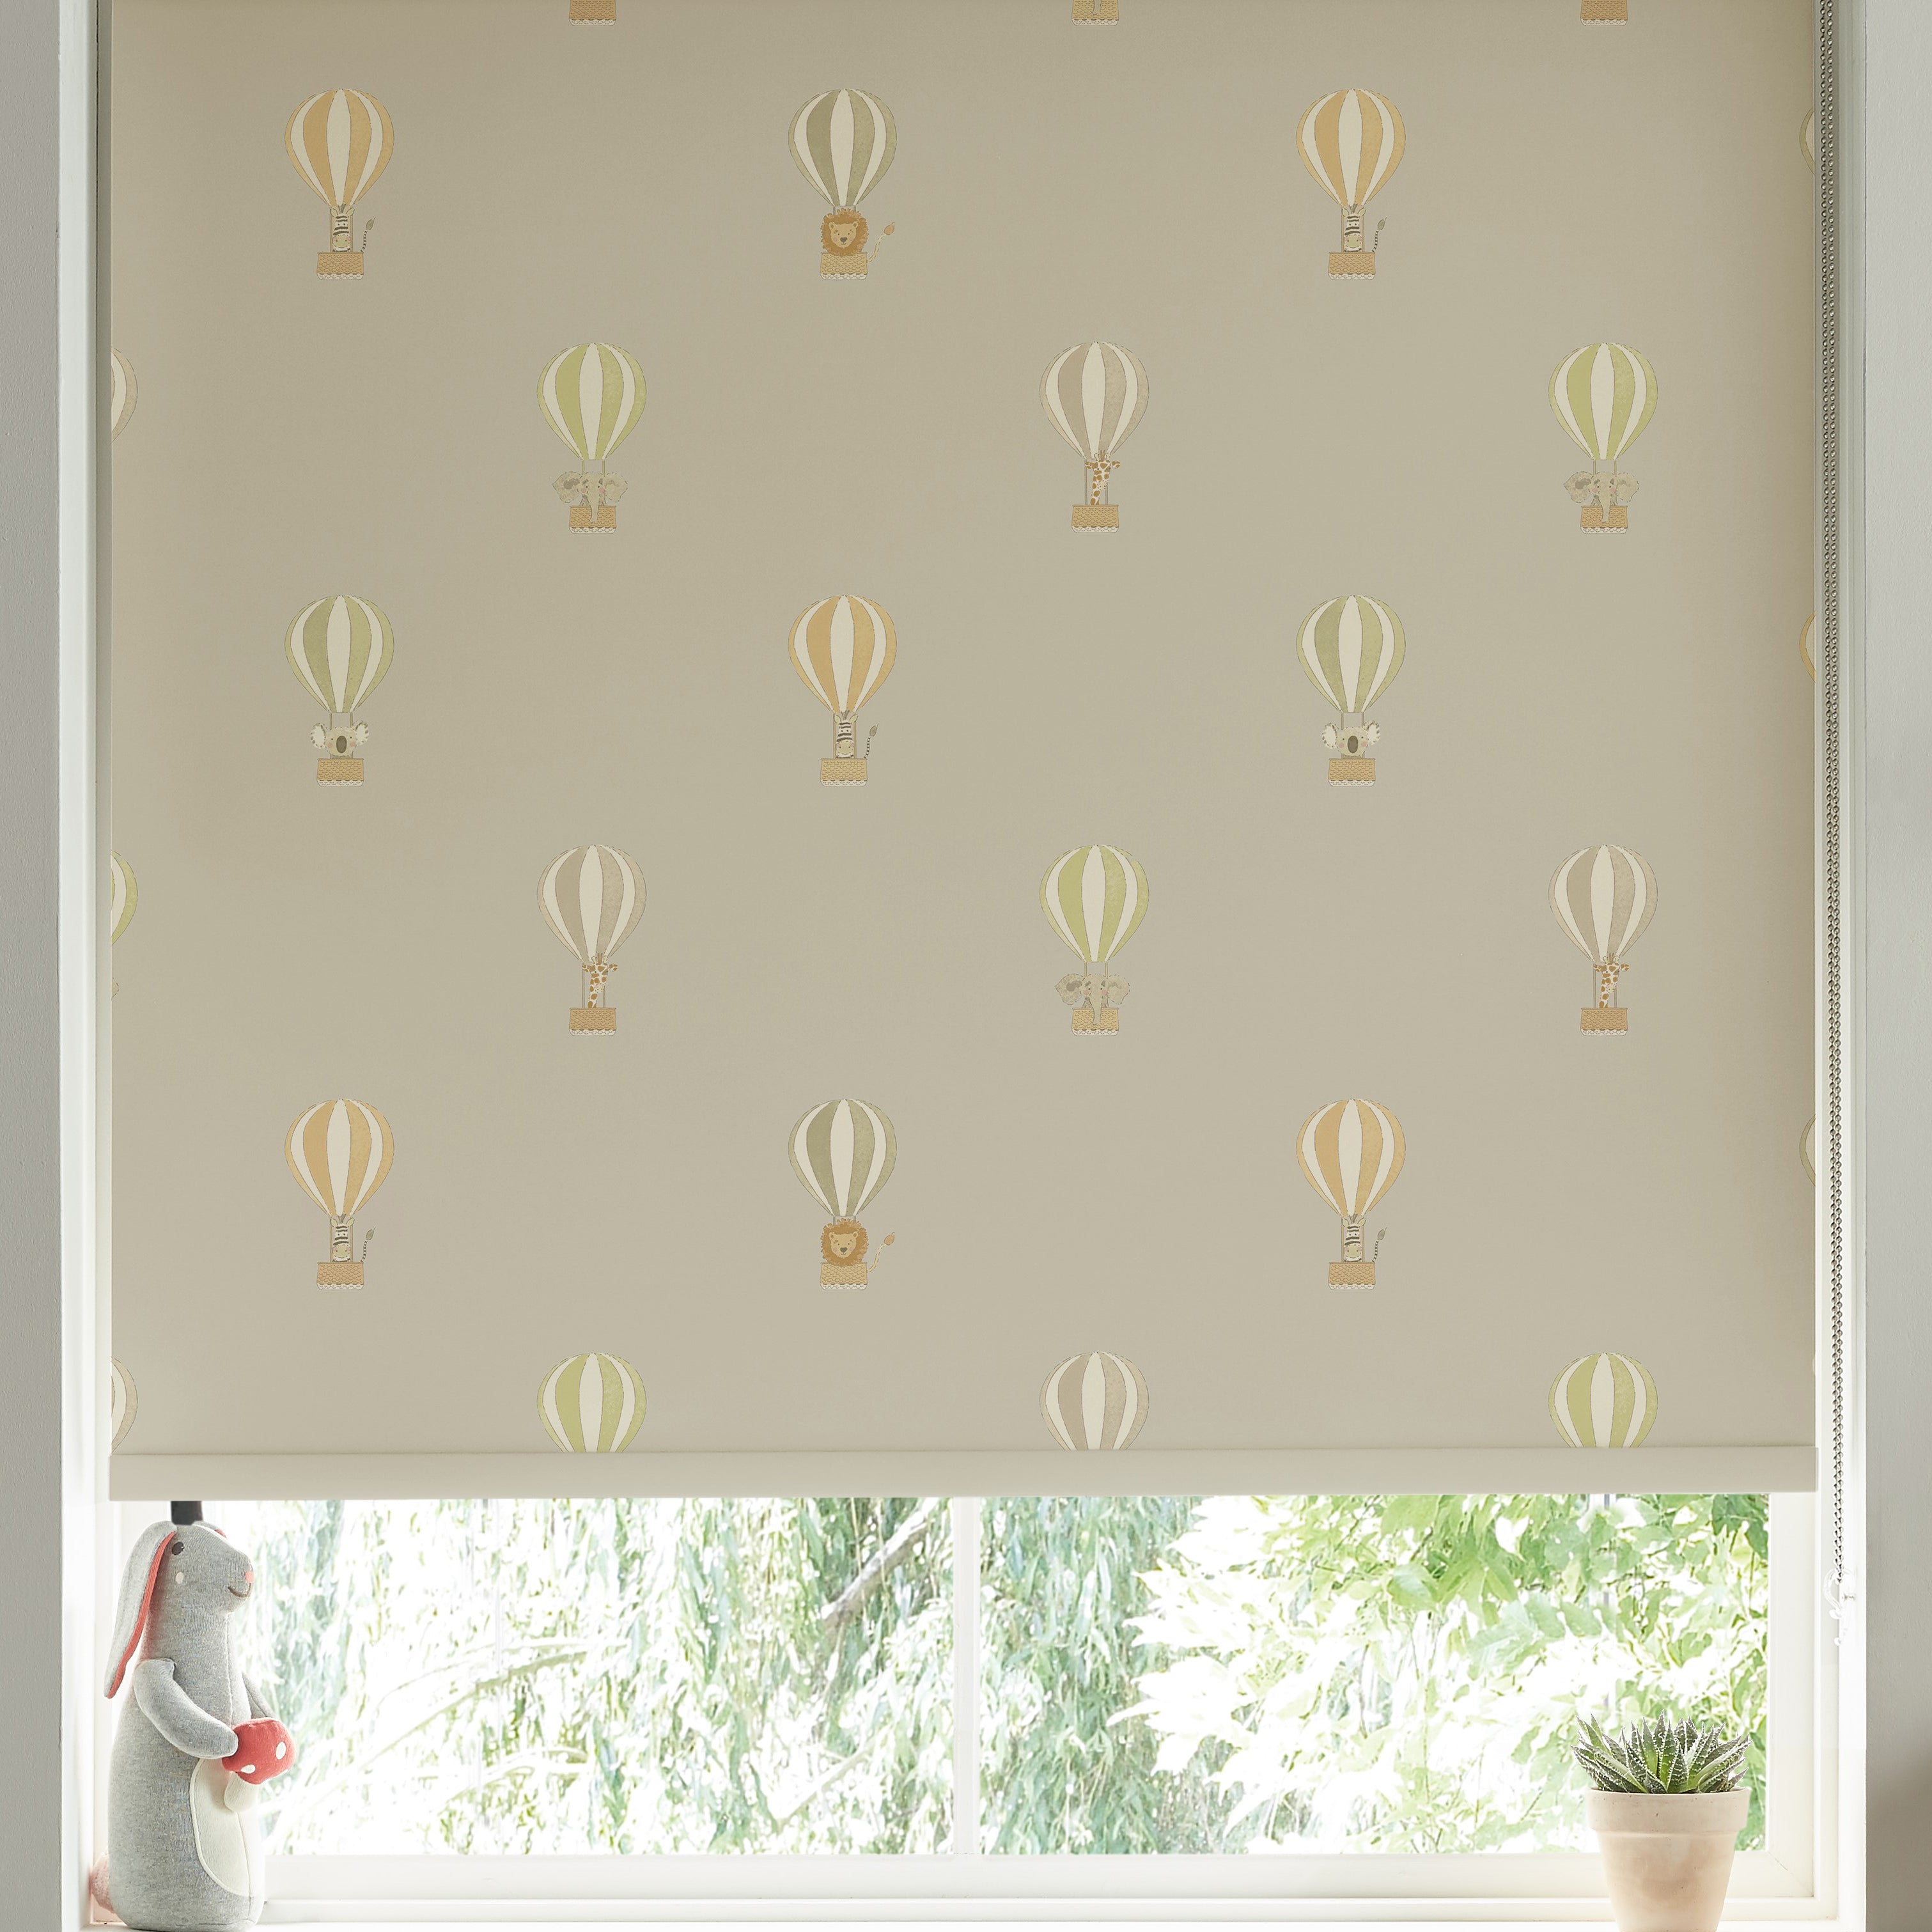 Sophie Allport Bears And Balloons Made To Measure Blackout Roller Blind Sand